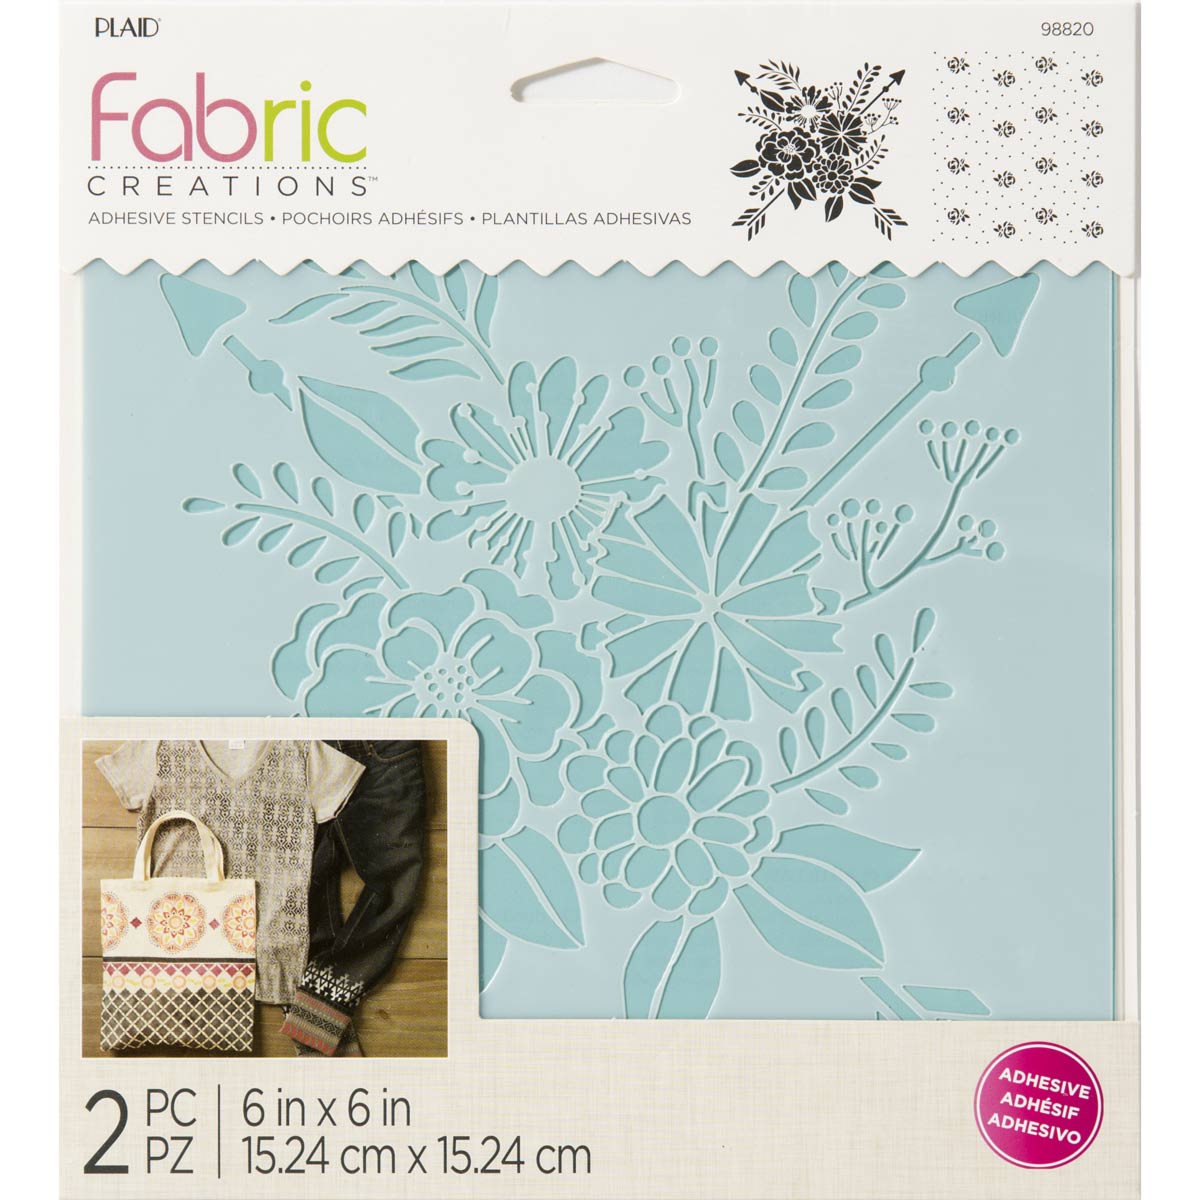 Fabric Creations™ Adhesive Stencils - Floral, 6